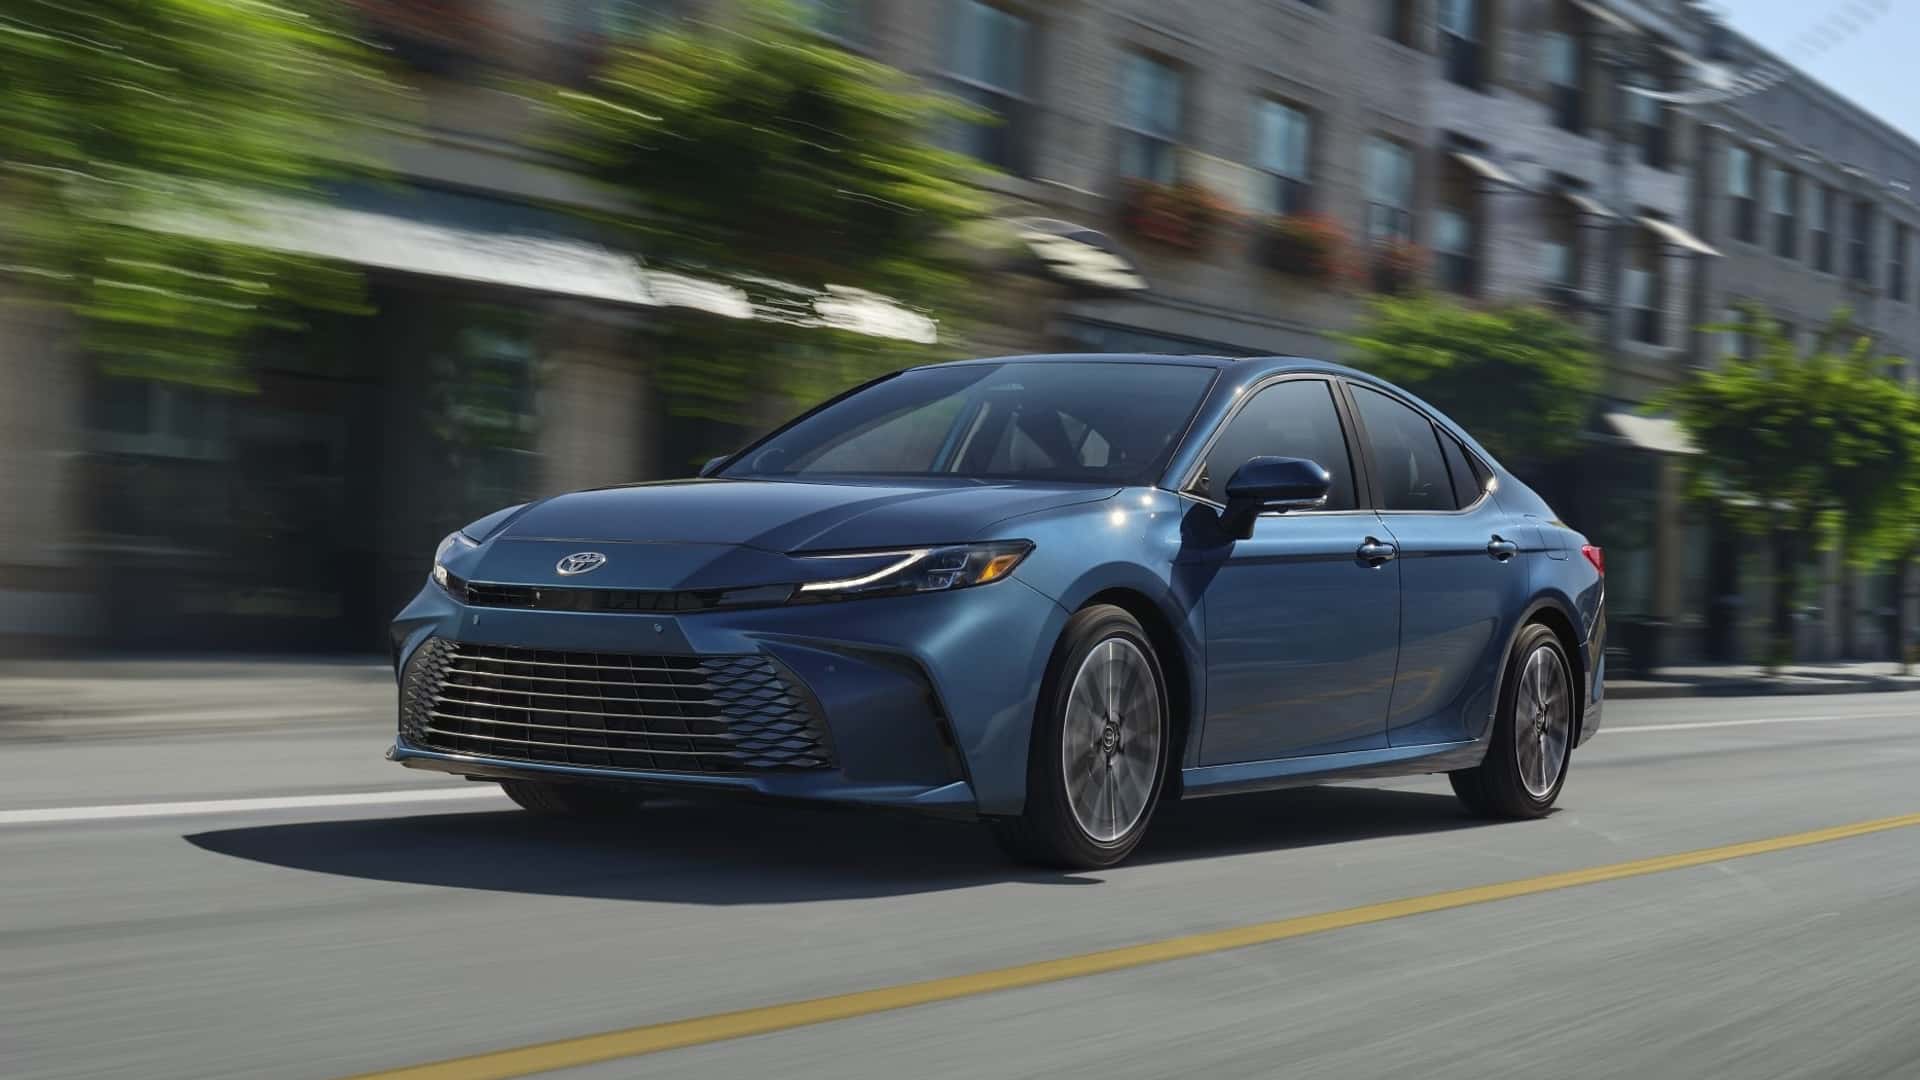 the 2025 toyota camry starts at $29,495